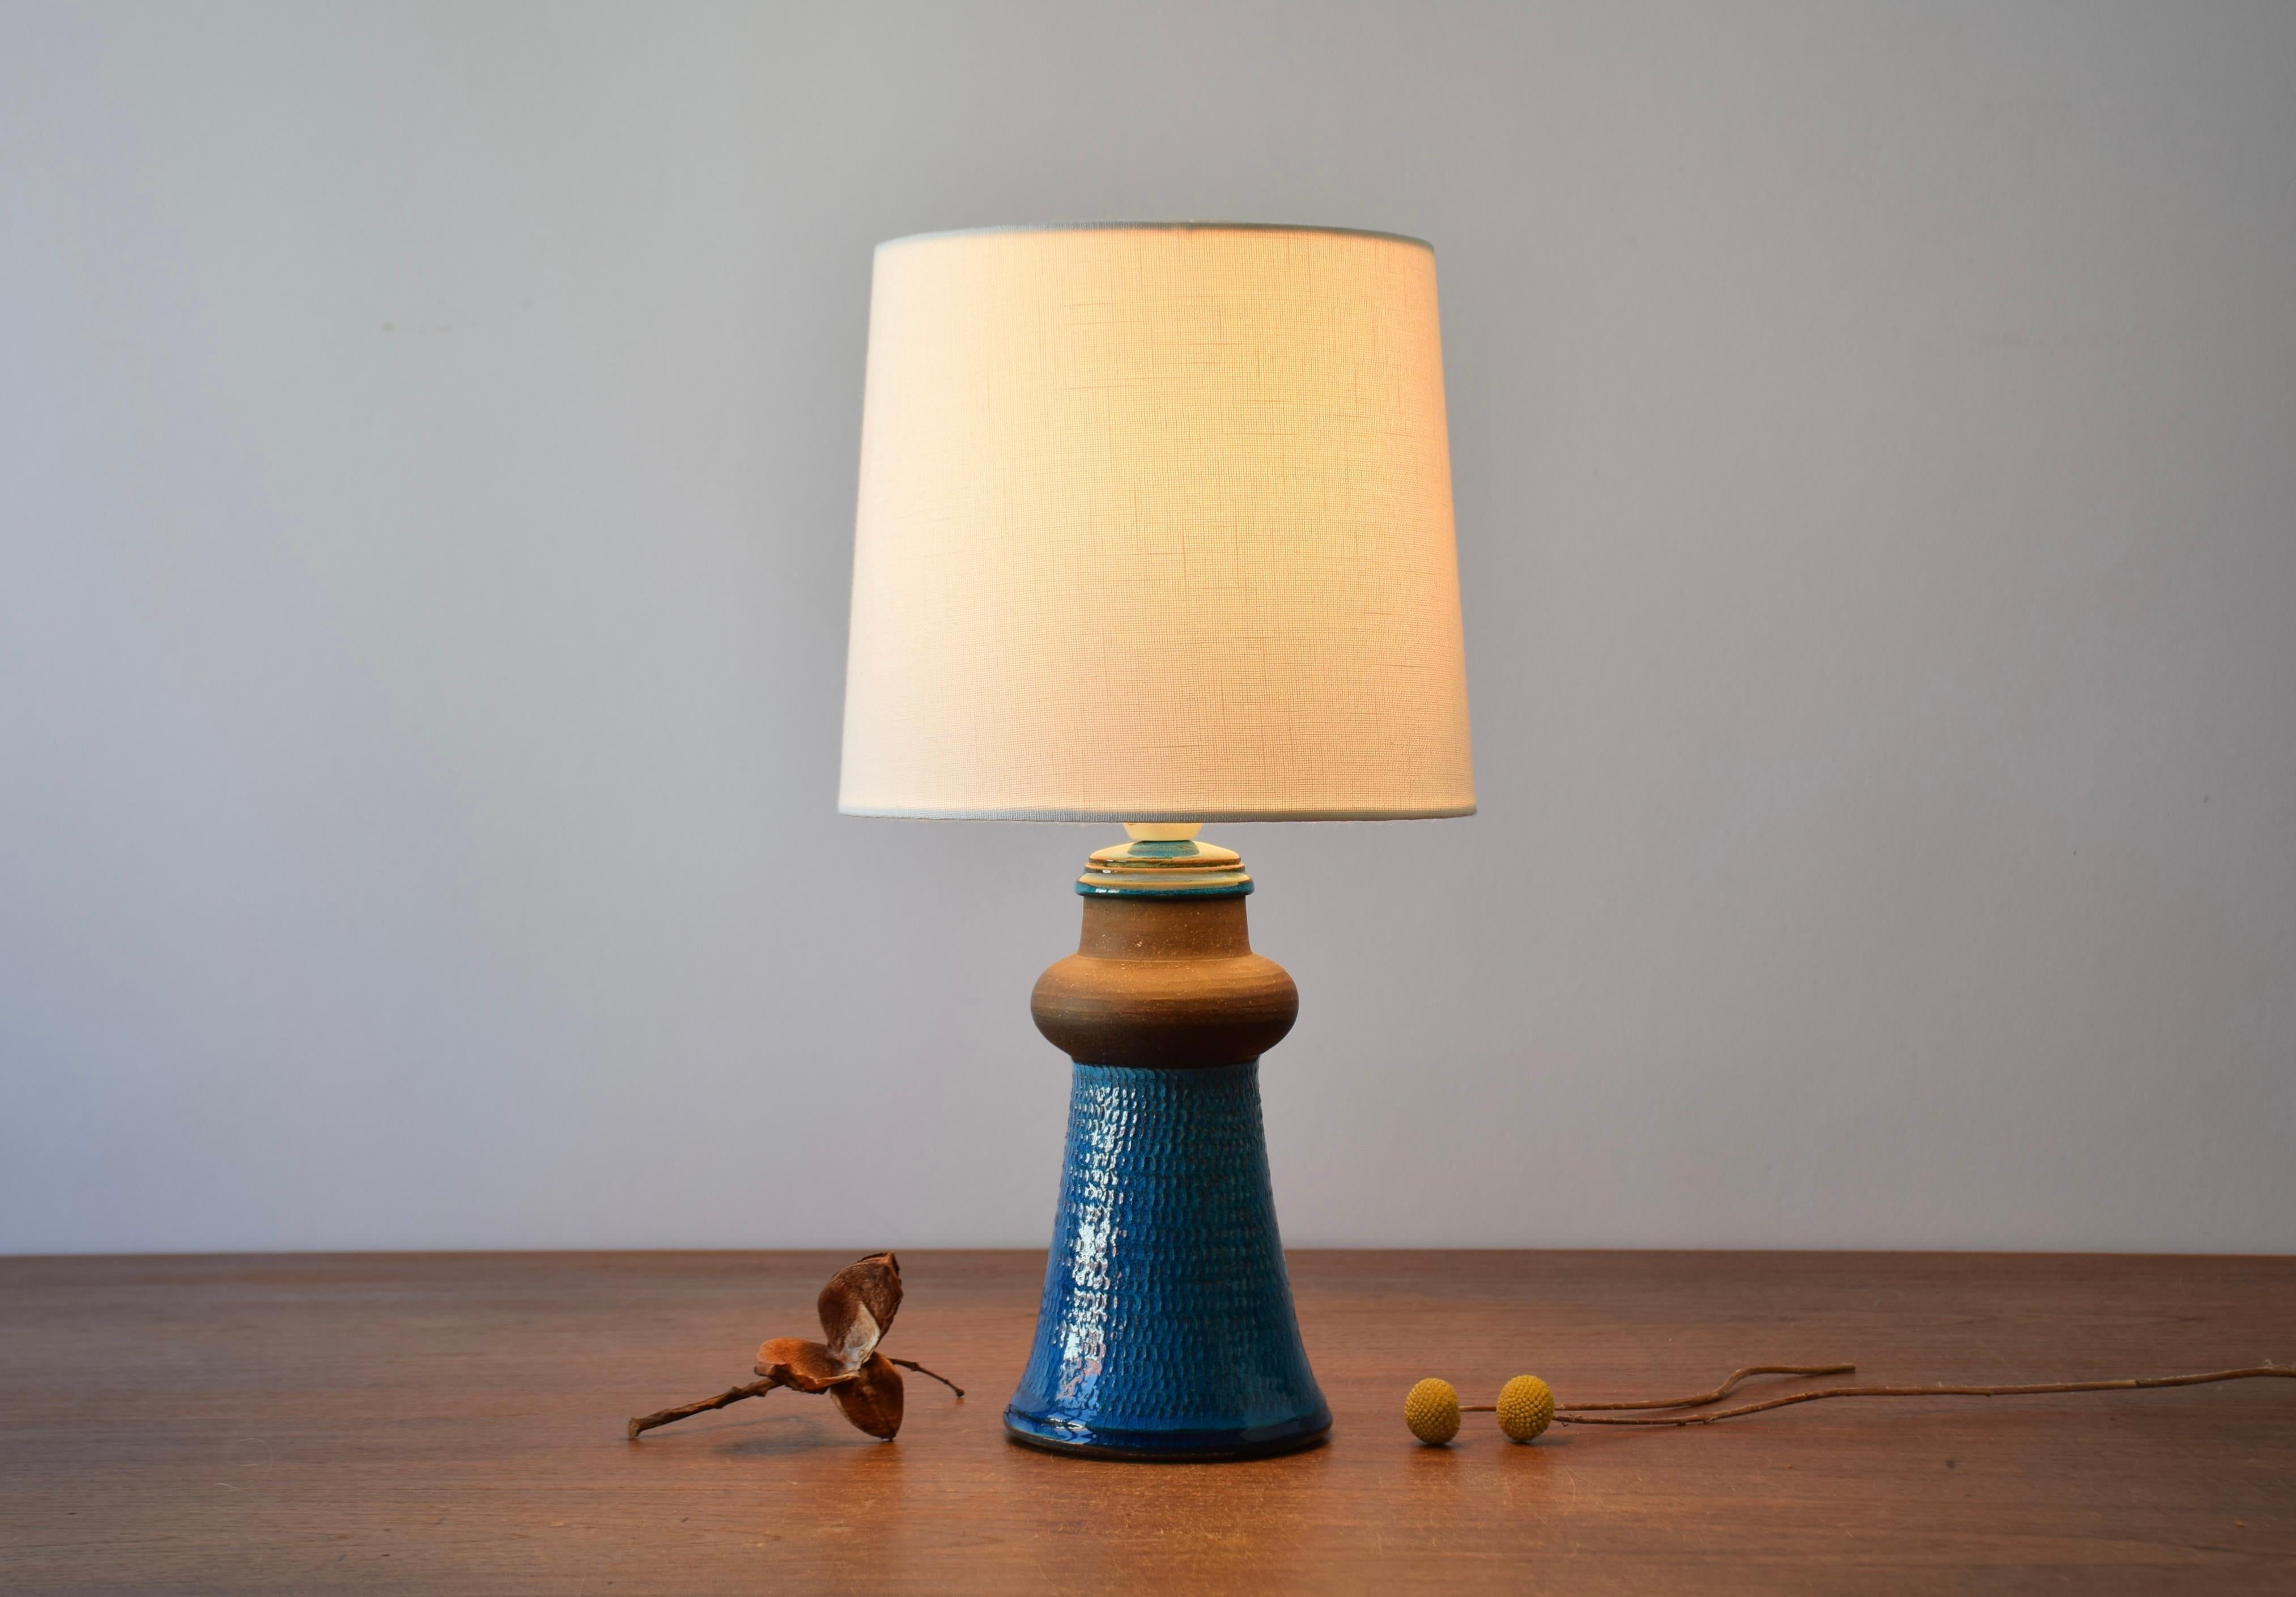 Small midcentury Danish table lamp by Nils Kähler for the ceramic workshop Kähler (HAK).
Made circa 1960s.

It is decorated with a turquoise blue glaze on a structured surface. Part of the neck is left unglazed and shows the dark brown smooth